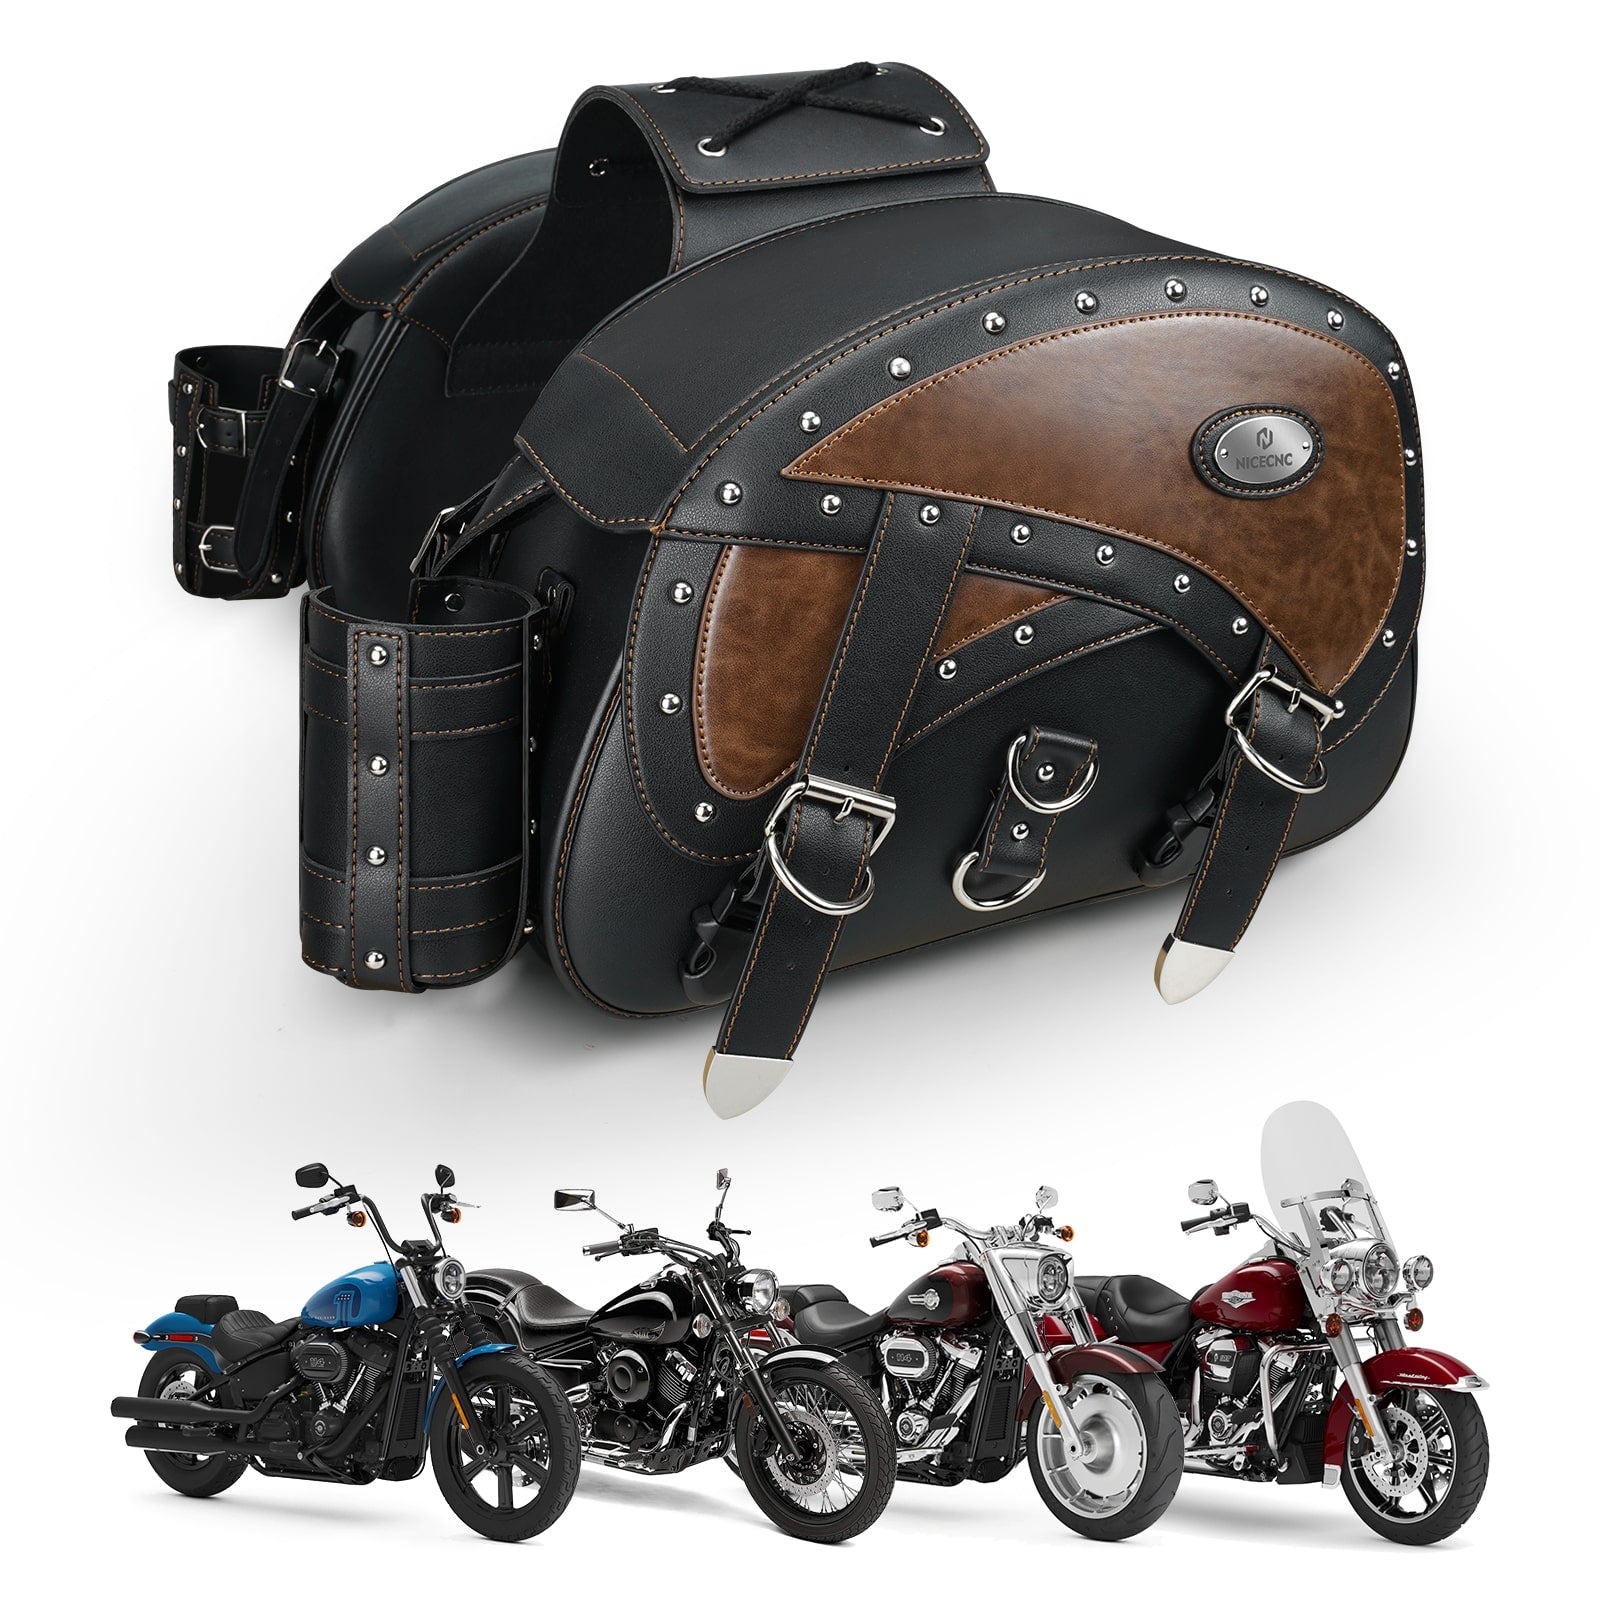 Motorcycle Saddlebags 35L Heavy Duty Leather Waterproof with Cup Holders For Cruiser Softail Dyna Road King